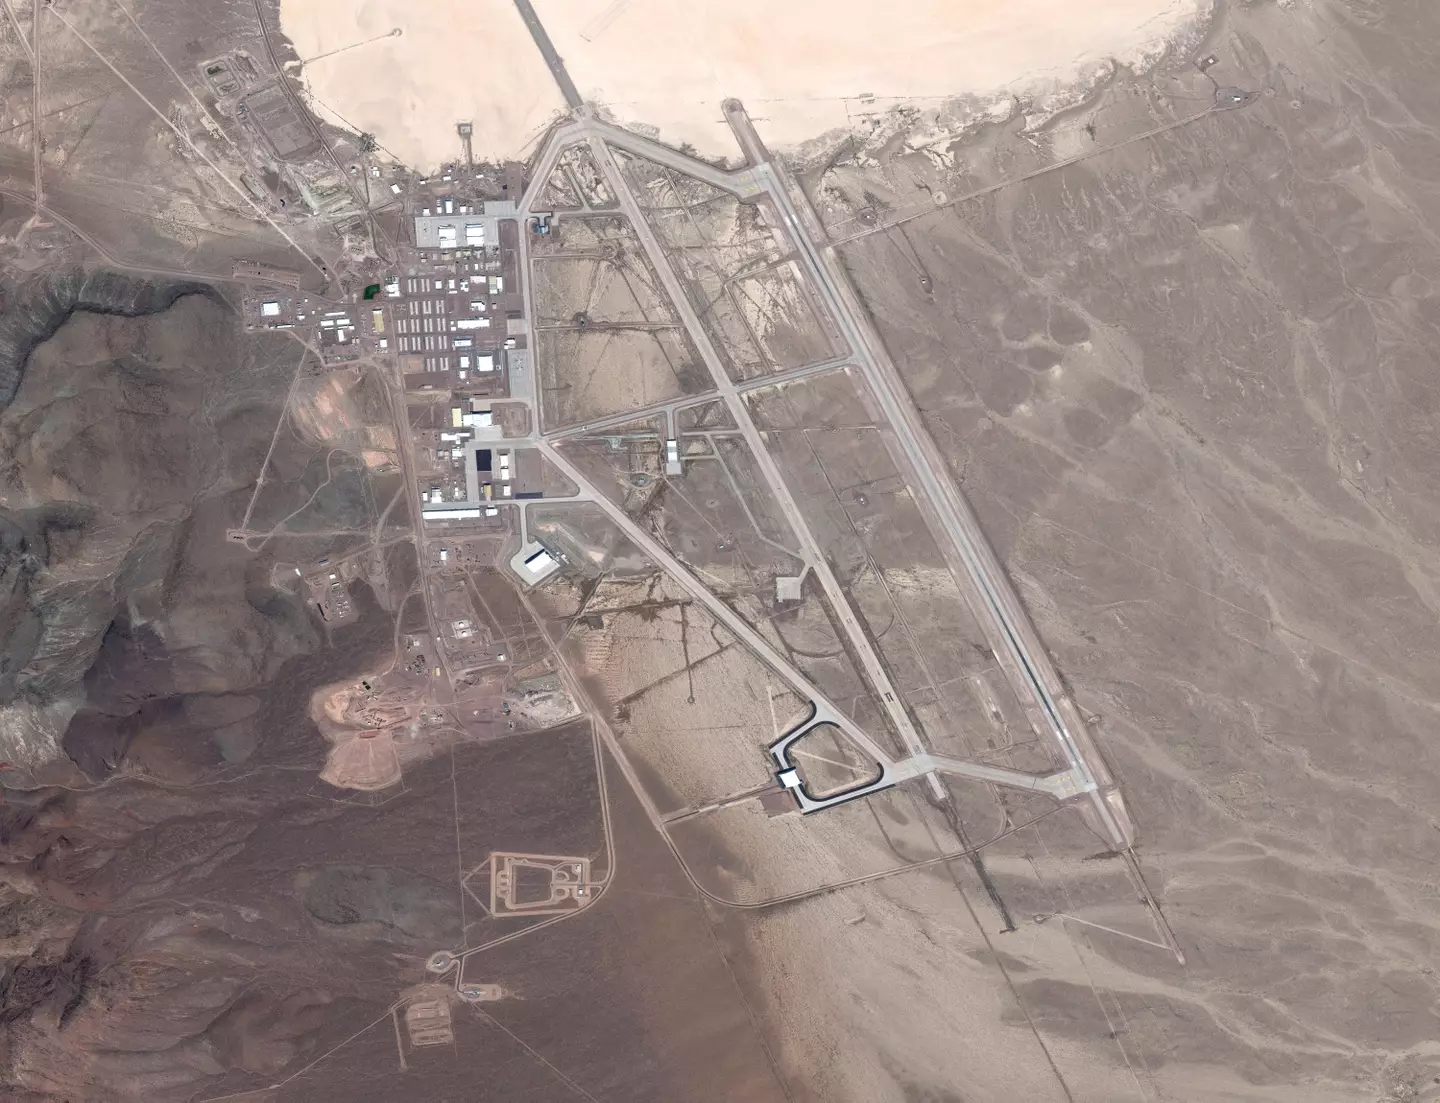 An aerial view of Area 51.